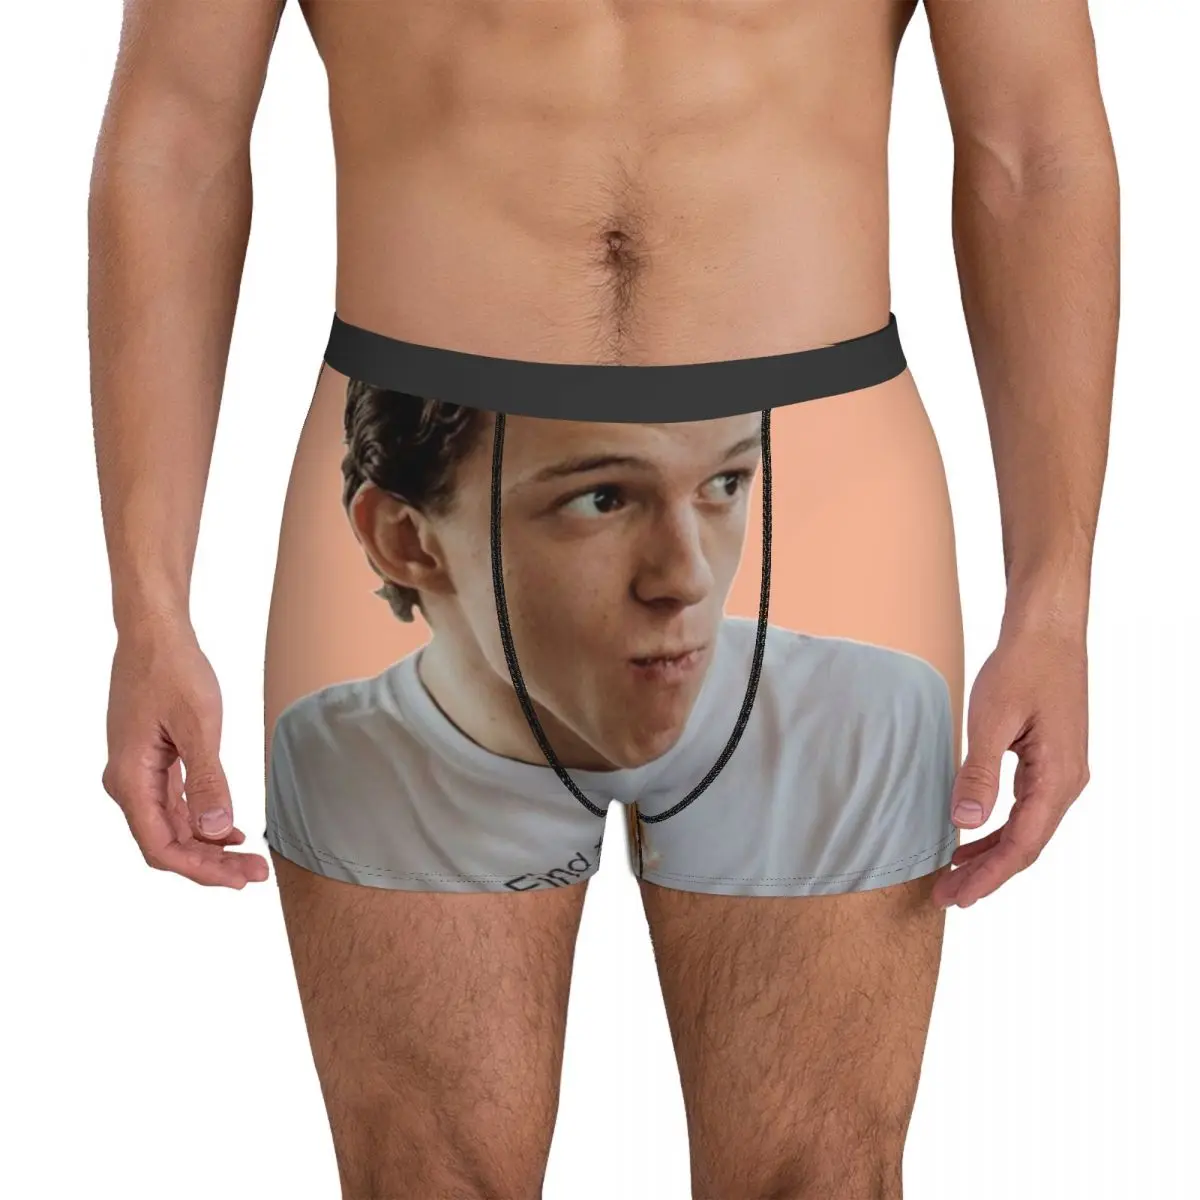 Tom Holland Underwear Eating Donut Math Tee Comfortable Panties Printing Boxer Brief Pouch Man Large Size Trunk